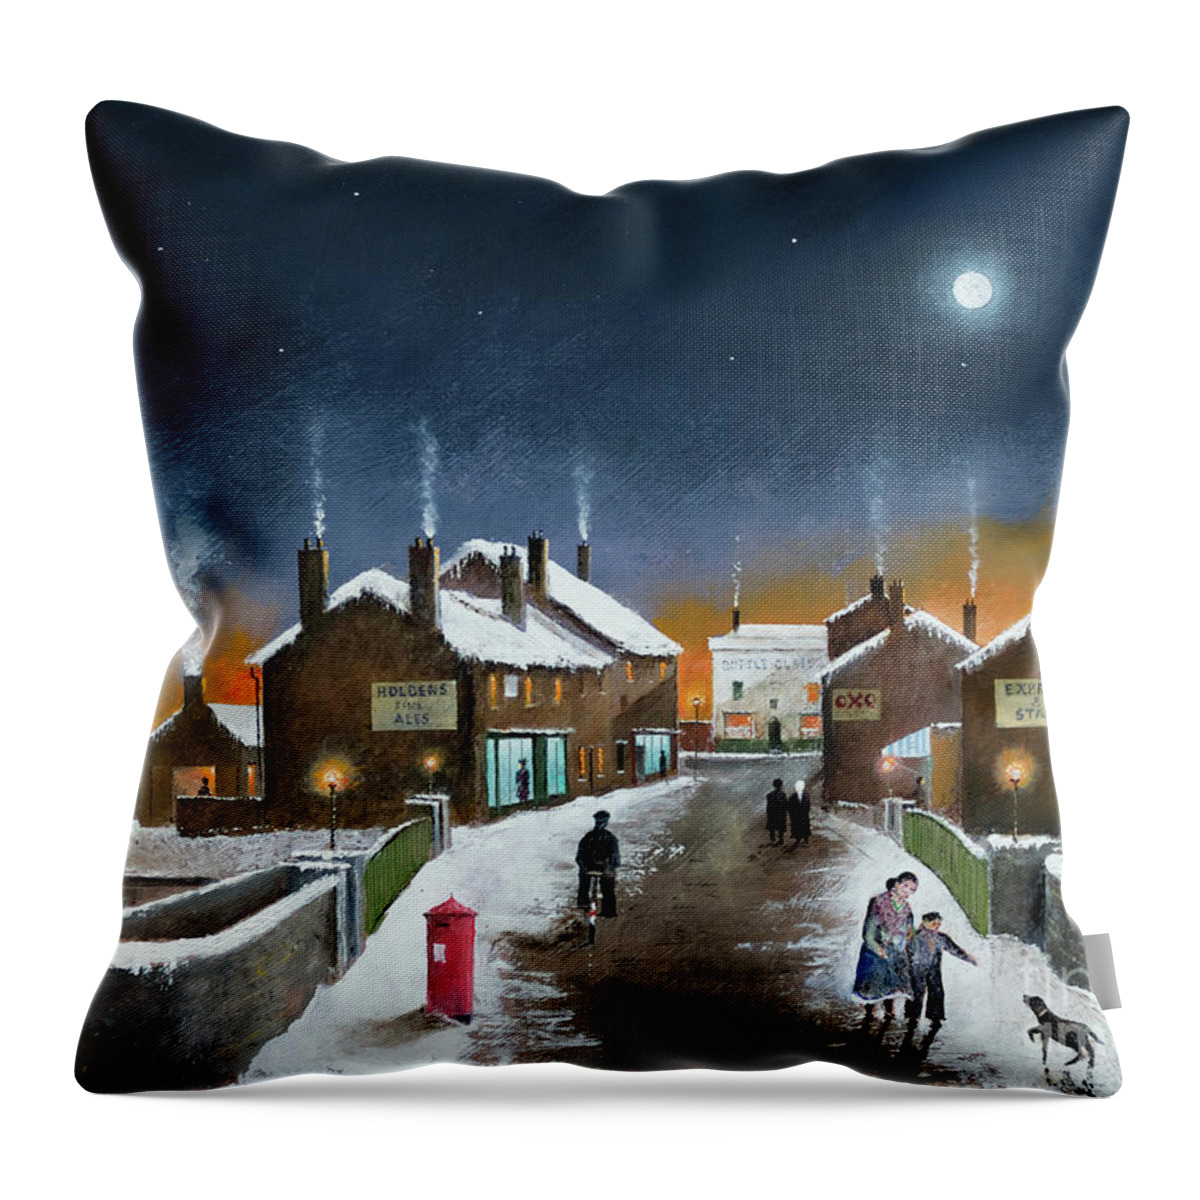 England Throw Pillow featuring the painting Black Country Winter - England by Ken Wood